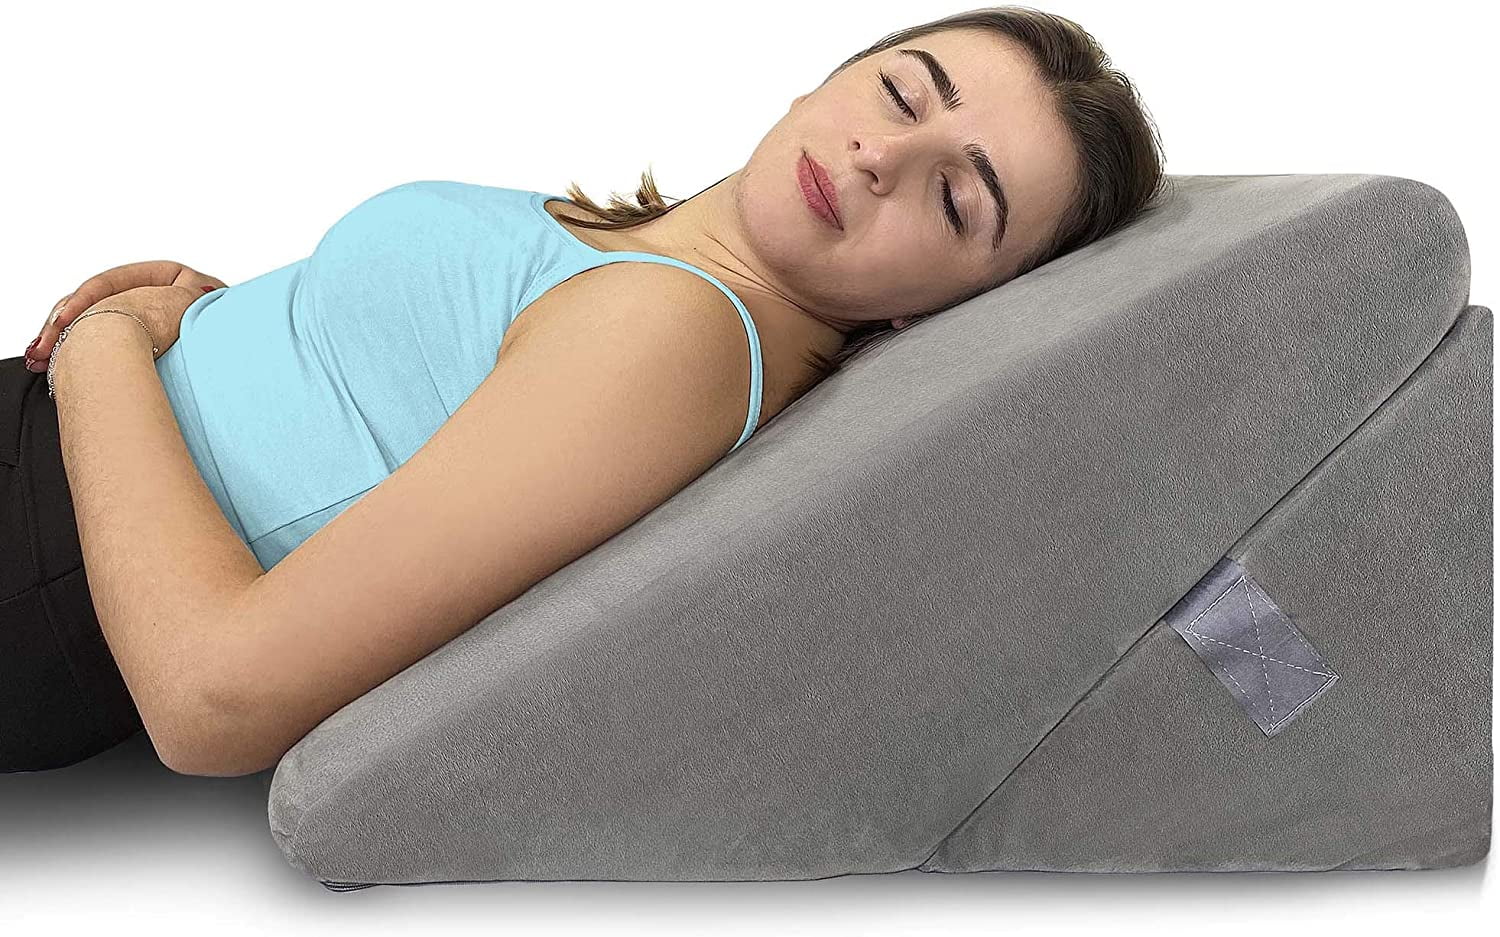 Bed Wedge Pillow, Back Support Memory Foam - Adjustable & Folding Incline Cushion